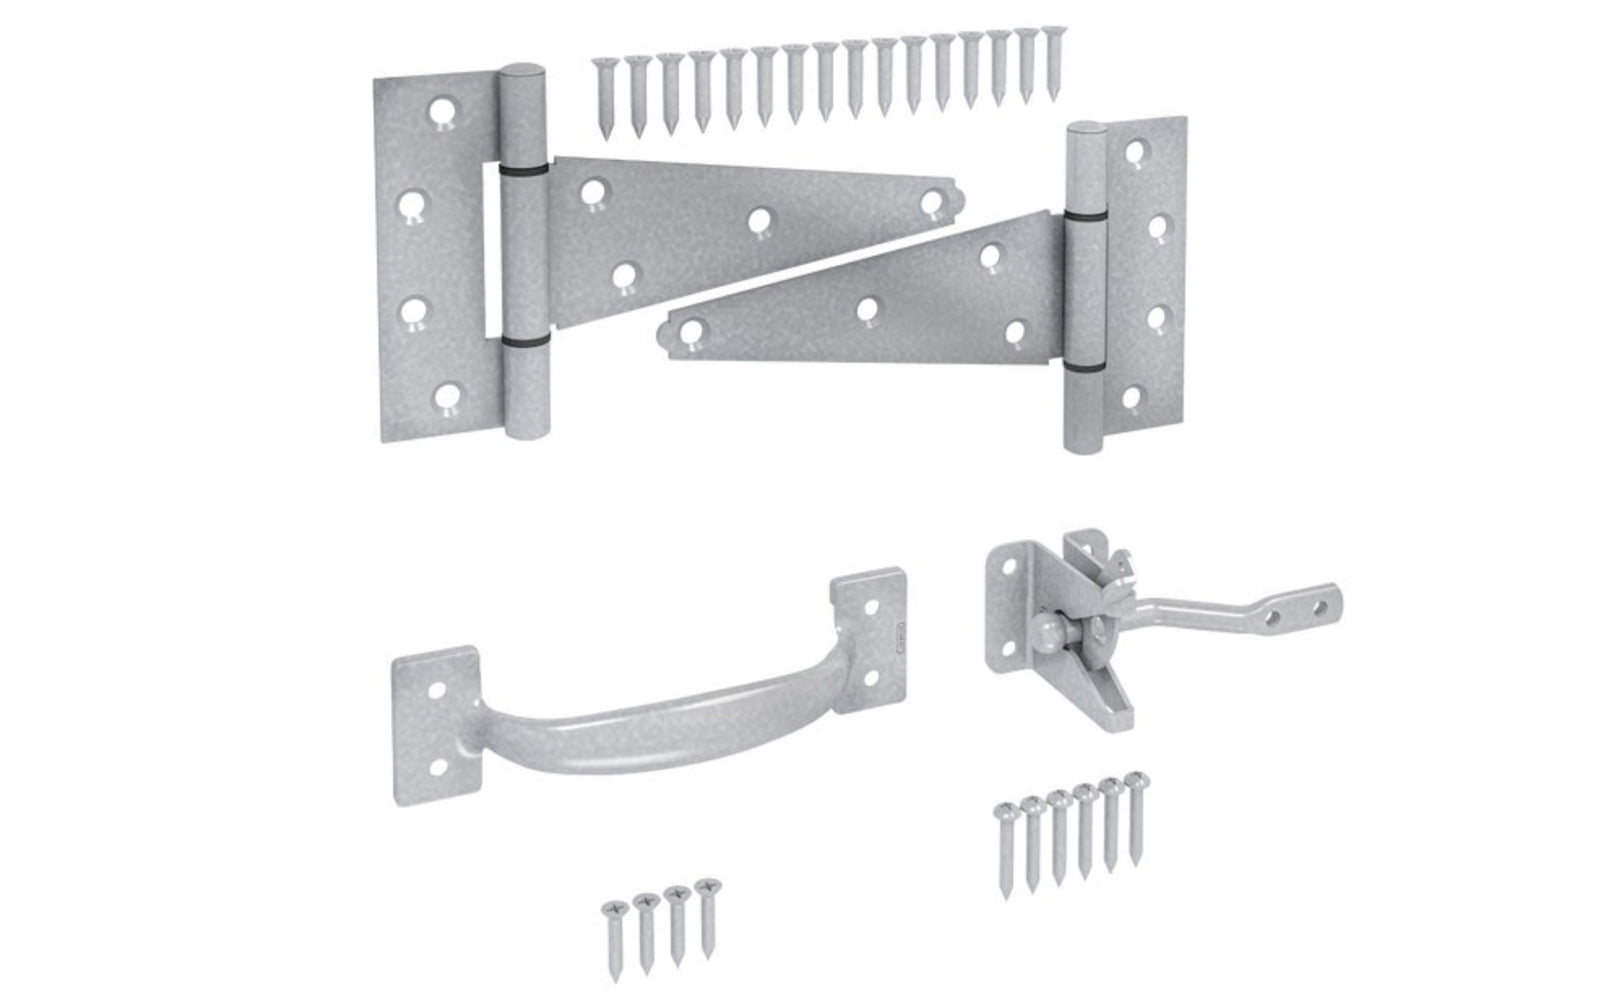 This galvanized steel gate kit is used for a variety of installations including doors & gates. Includes (1) gate latch, (2) T-hinges, (1) pull, & mounting hardware. For exterior applications. WeatherGuard Protection to withstand harsh weather conditions & prevent corrosion. National Hardware Catalog Model No. N166-008.